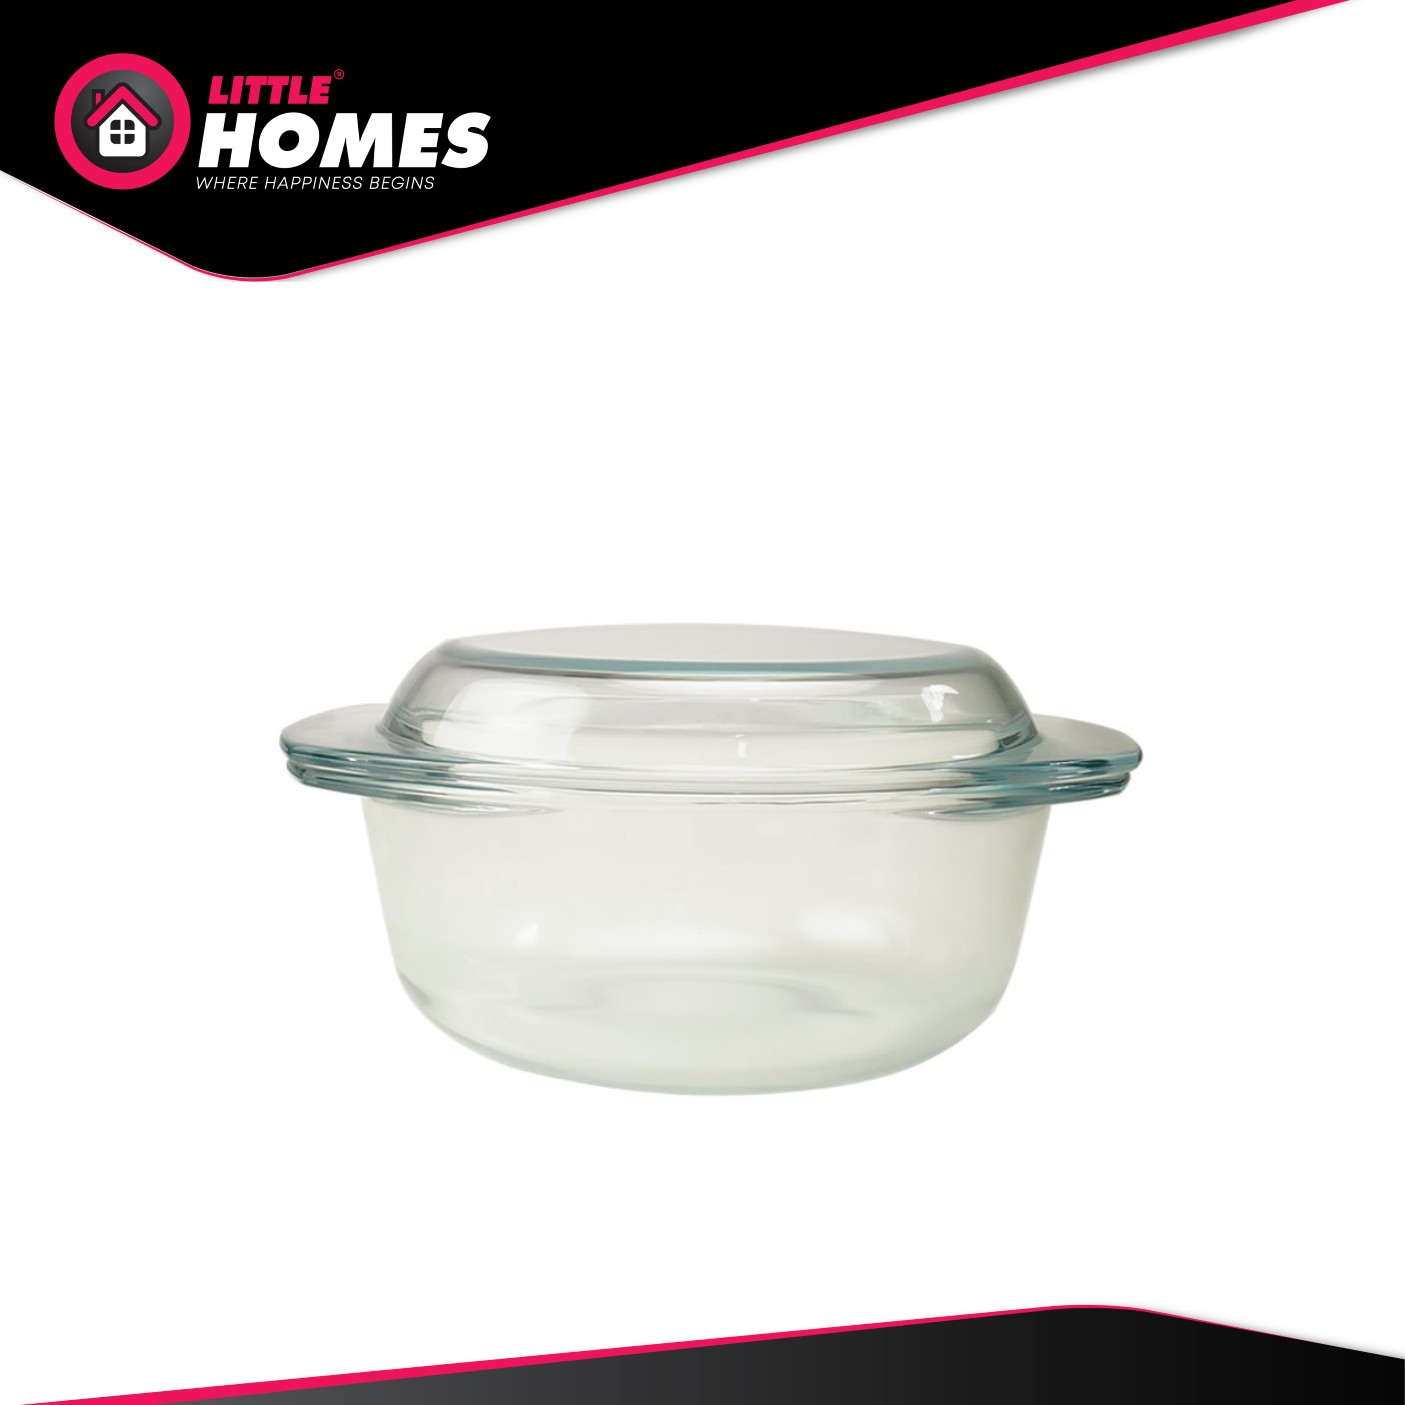 Little Homes 1.5L Tempered Glass Casserole Serving Bowl with Glass Lid